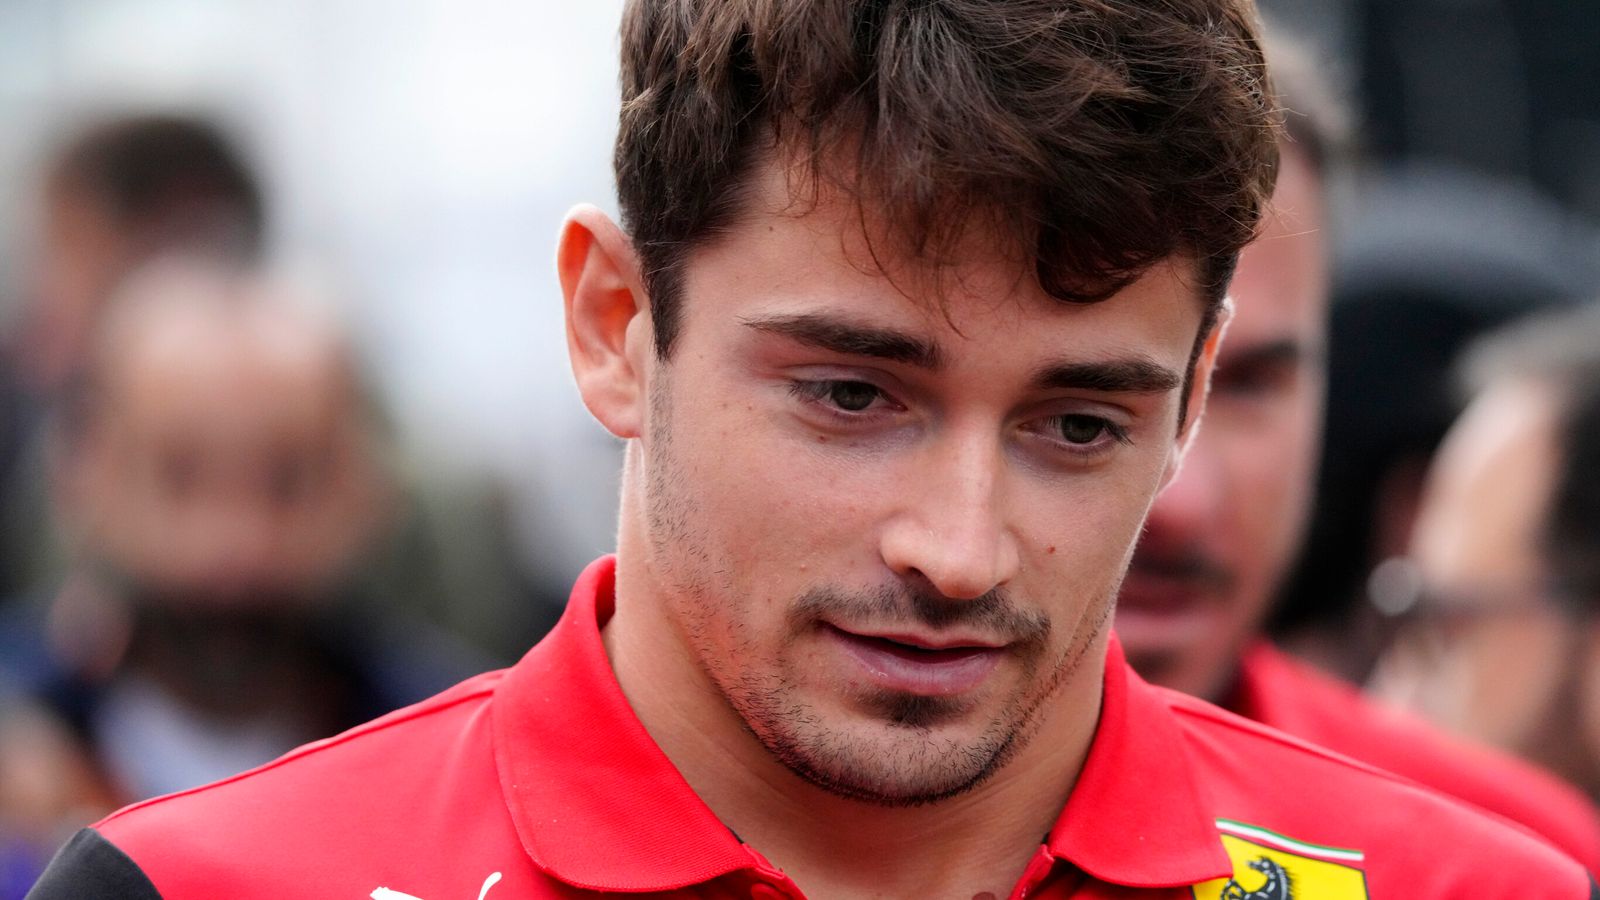 Mexico City GP: Charles Leclerc ‘hurt’ by performance as Paul di Resta outlines fears for Ferrari